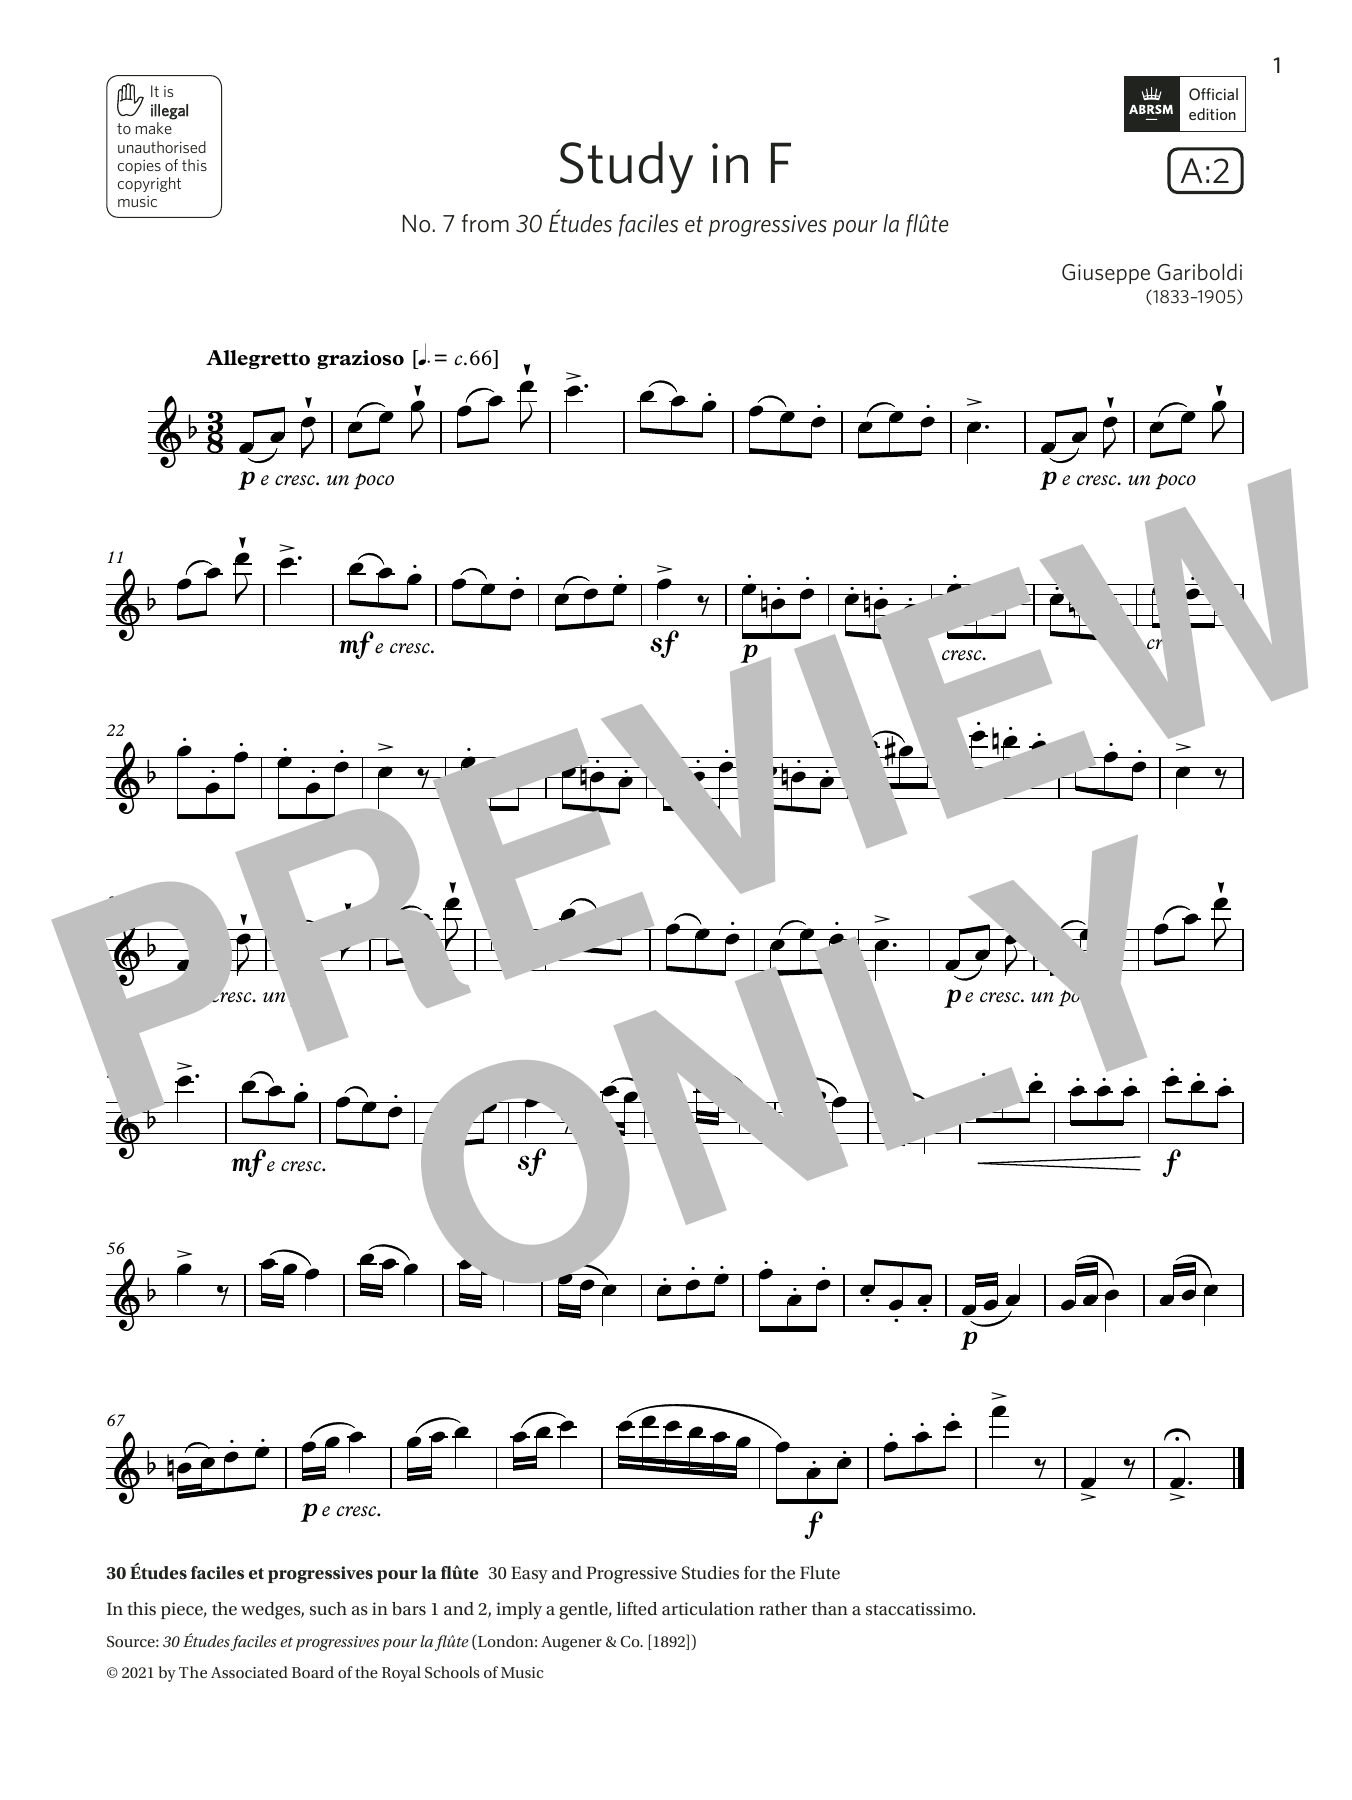 Download Giuseppe Gariboldi Study in F (Grade 3 List A2 from the AB Sheet Music